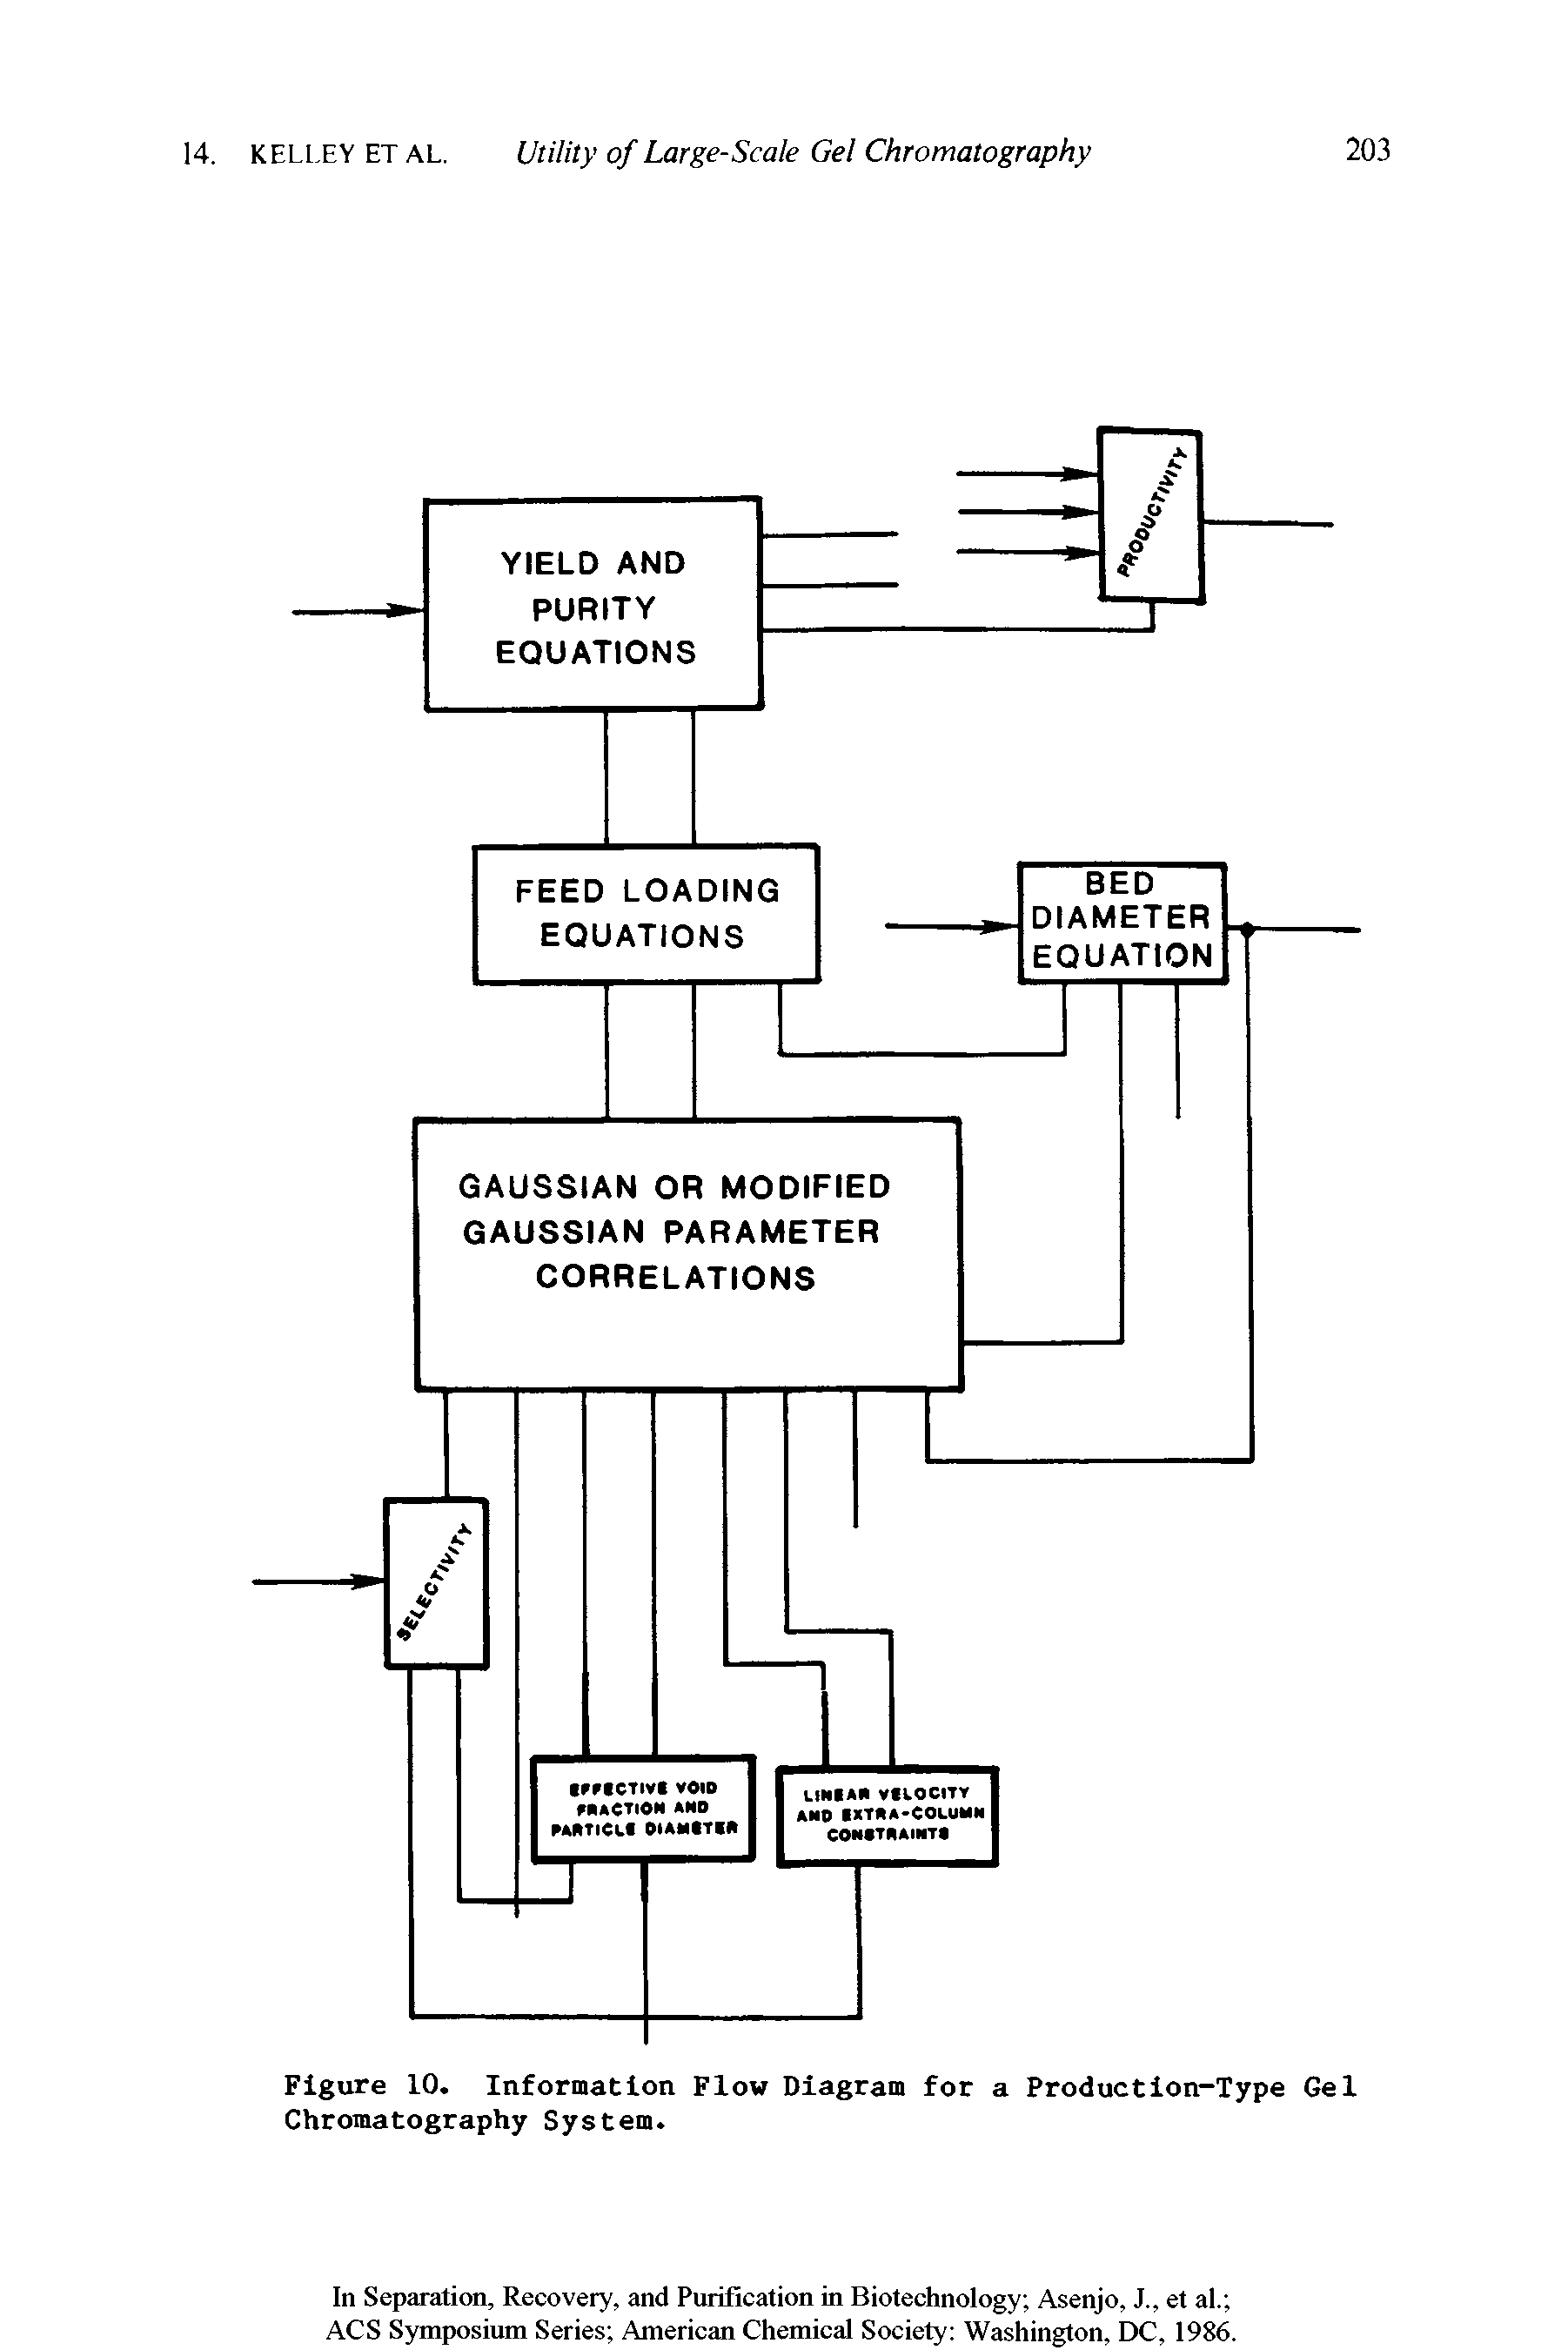 Figure 10. Information Flow Diagram for a Production-Type Gel Chromatography System.